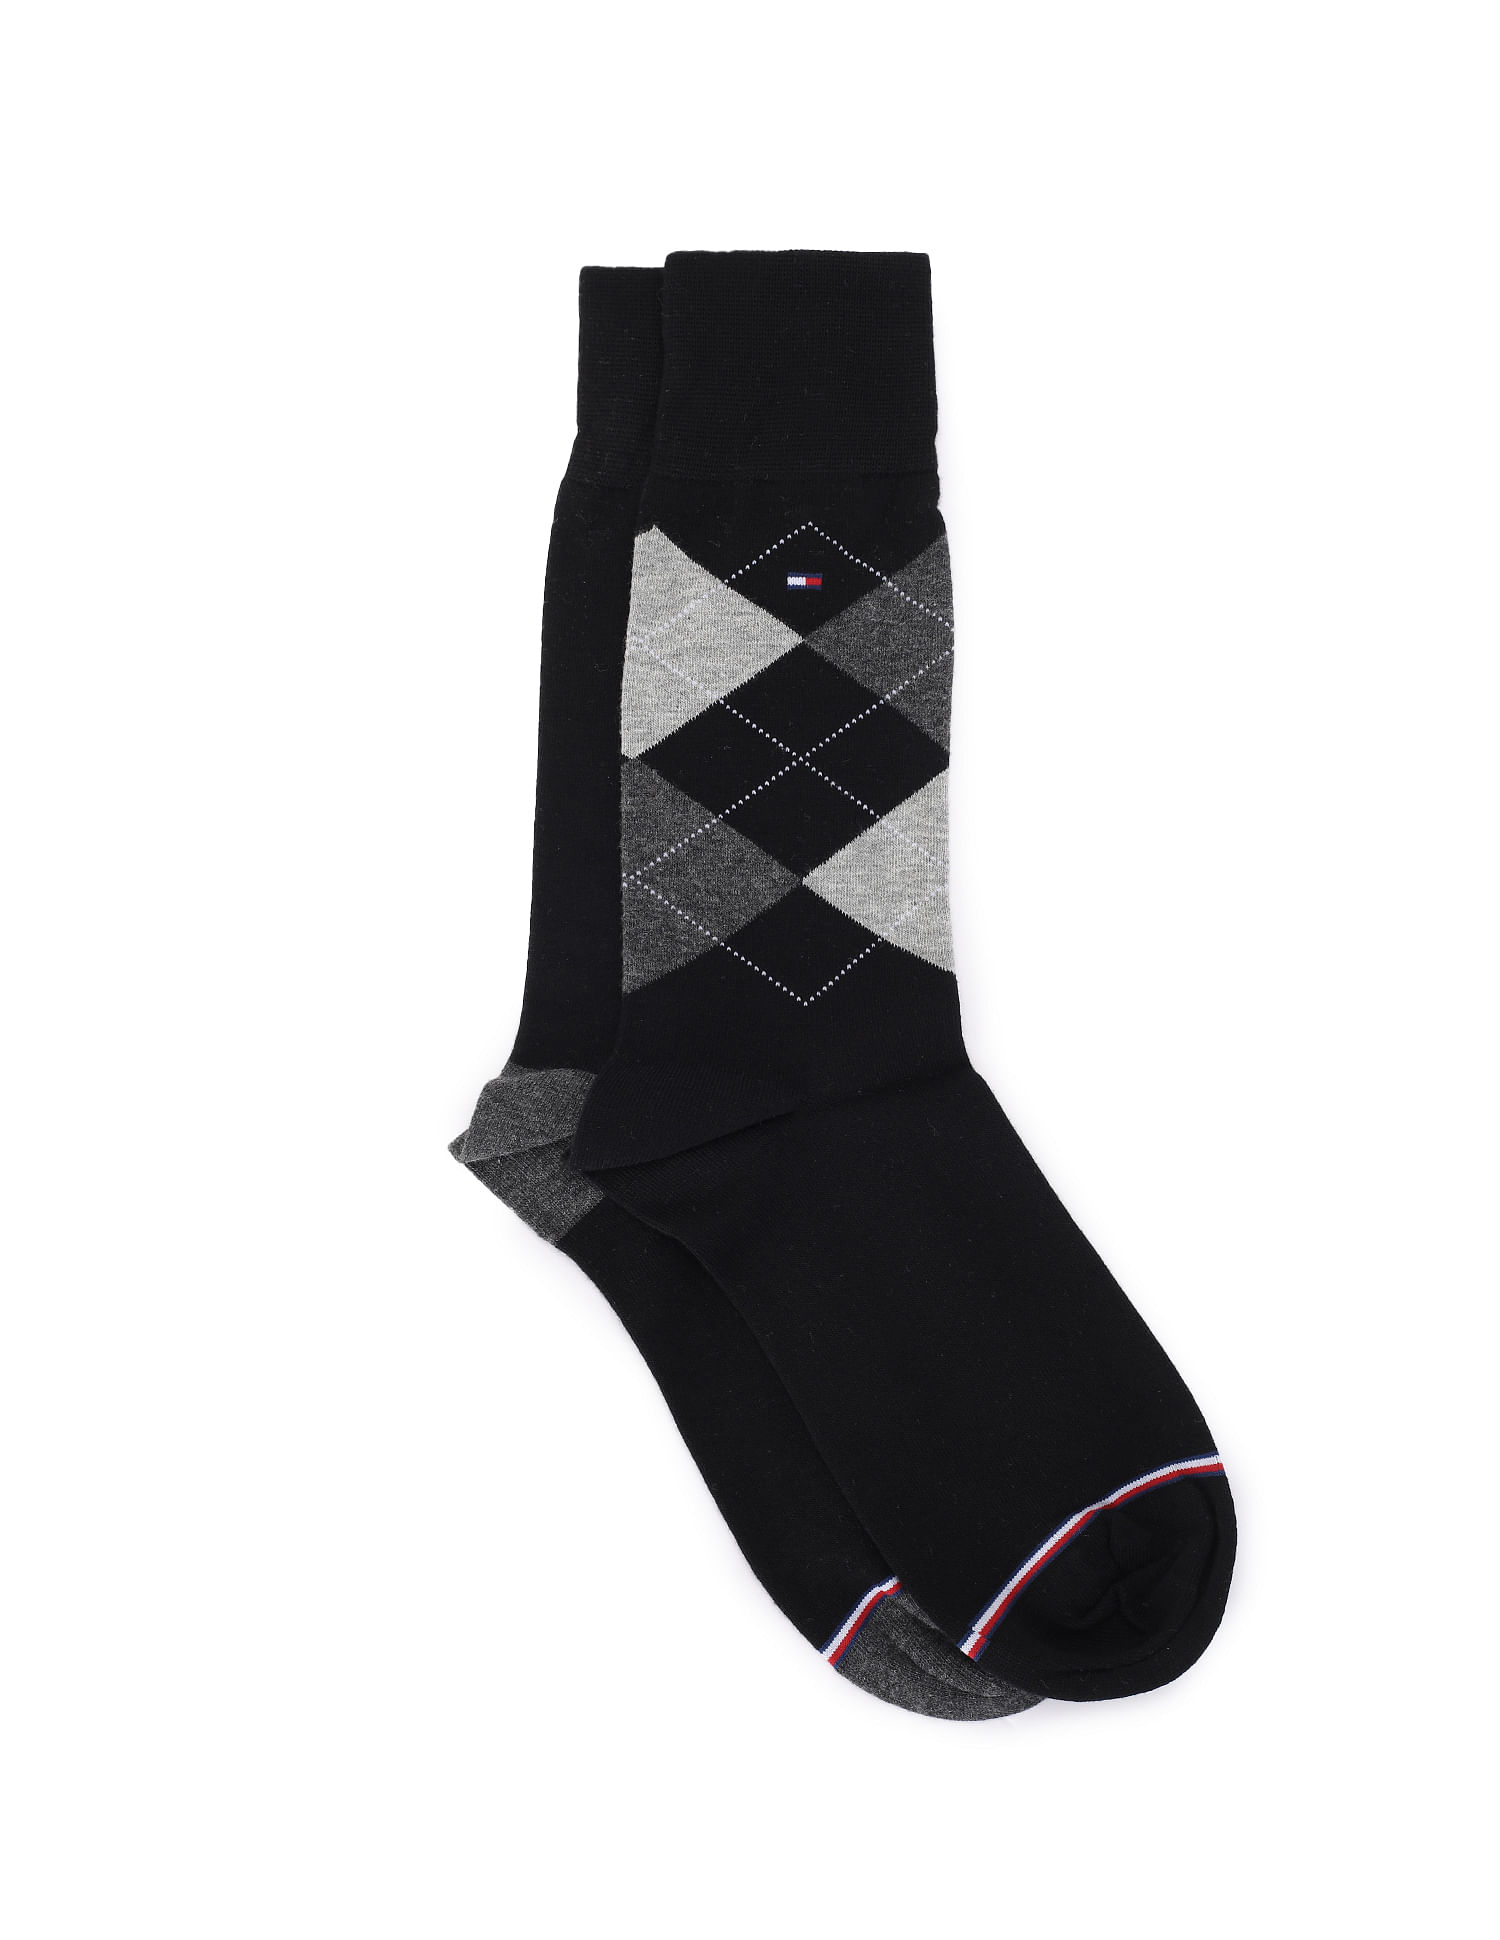 23 Best Mens Dress Socks in 2023 For Every Budget Style and Situation   GQ